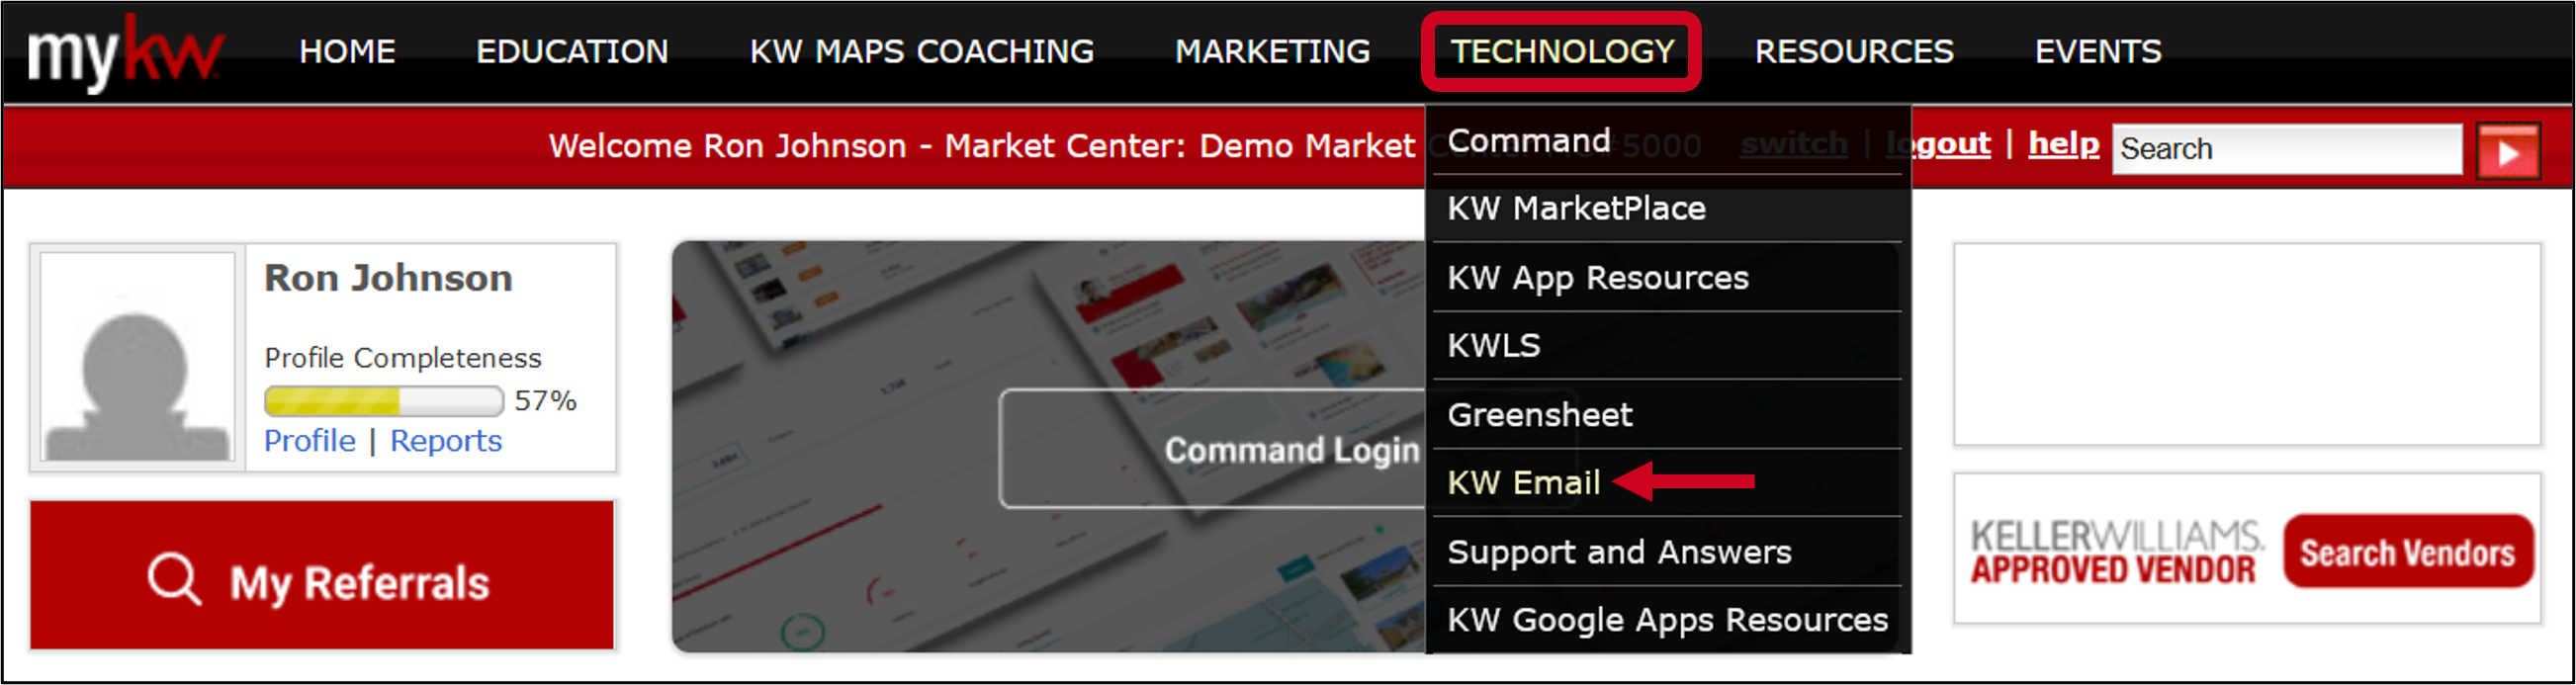 mykw_technology_kw_email.png